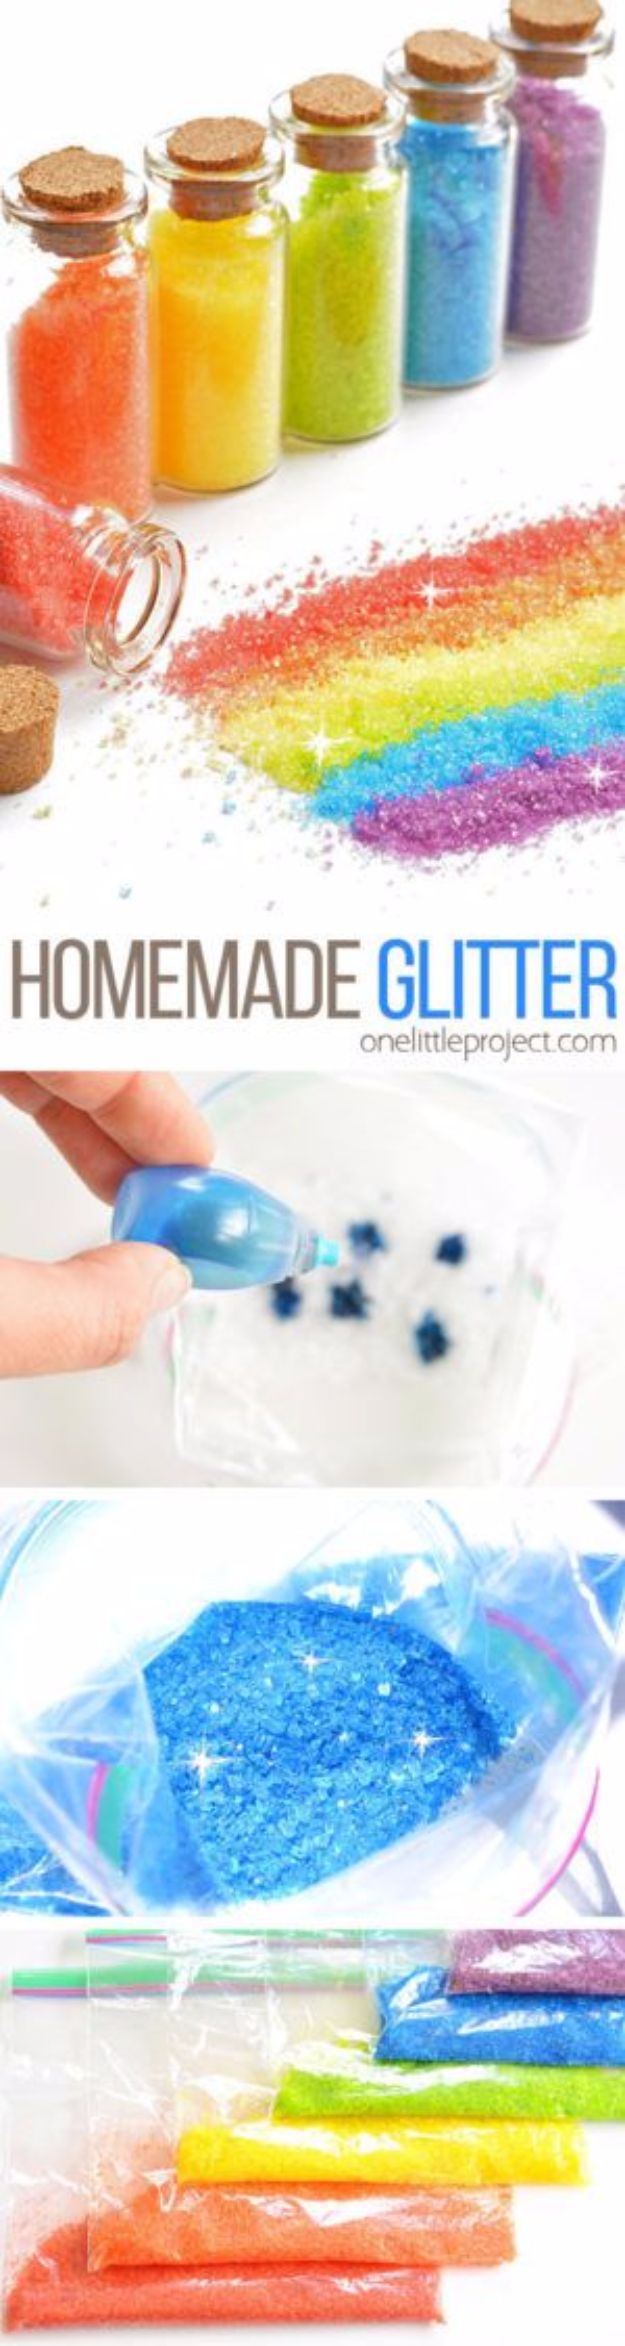 DIY Ideas WIth Glitter - Homemade Glitter - Easy Crafts and Projects for Decoration, Gifts, and Bedroom Decor - How To Make Ombre, Mod Podge and Glitter Mason Jar Gift Ideas For Teens - Easy Clothes and Makeup Crafts For Teenagers #diyideas #glitter #crafts